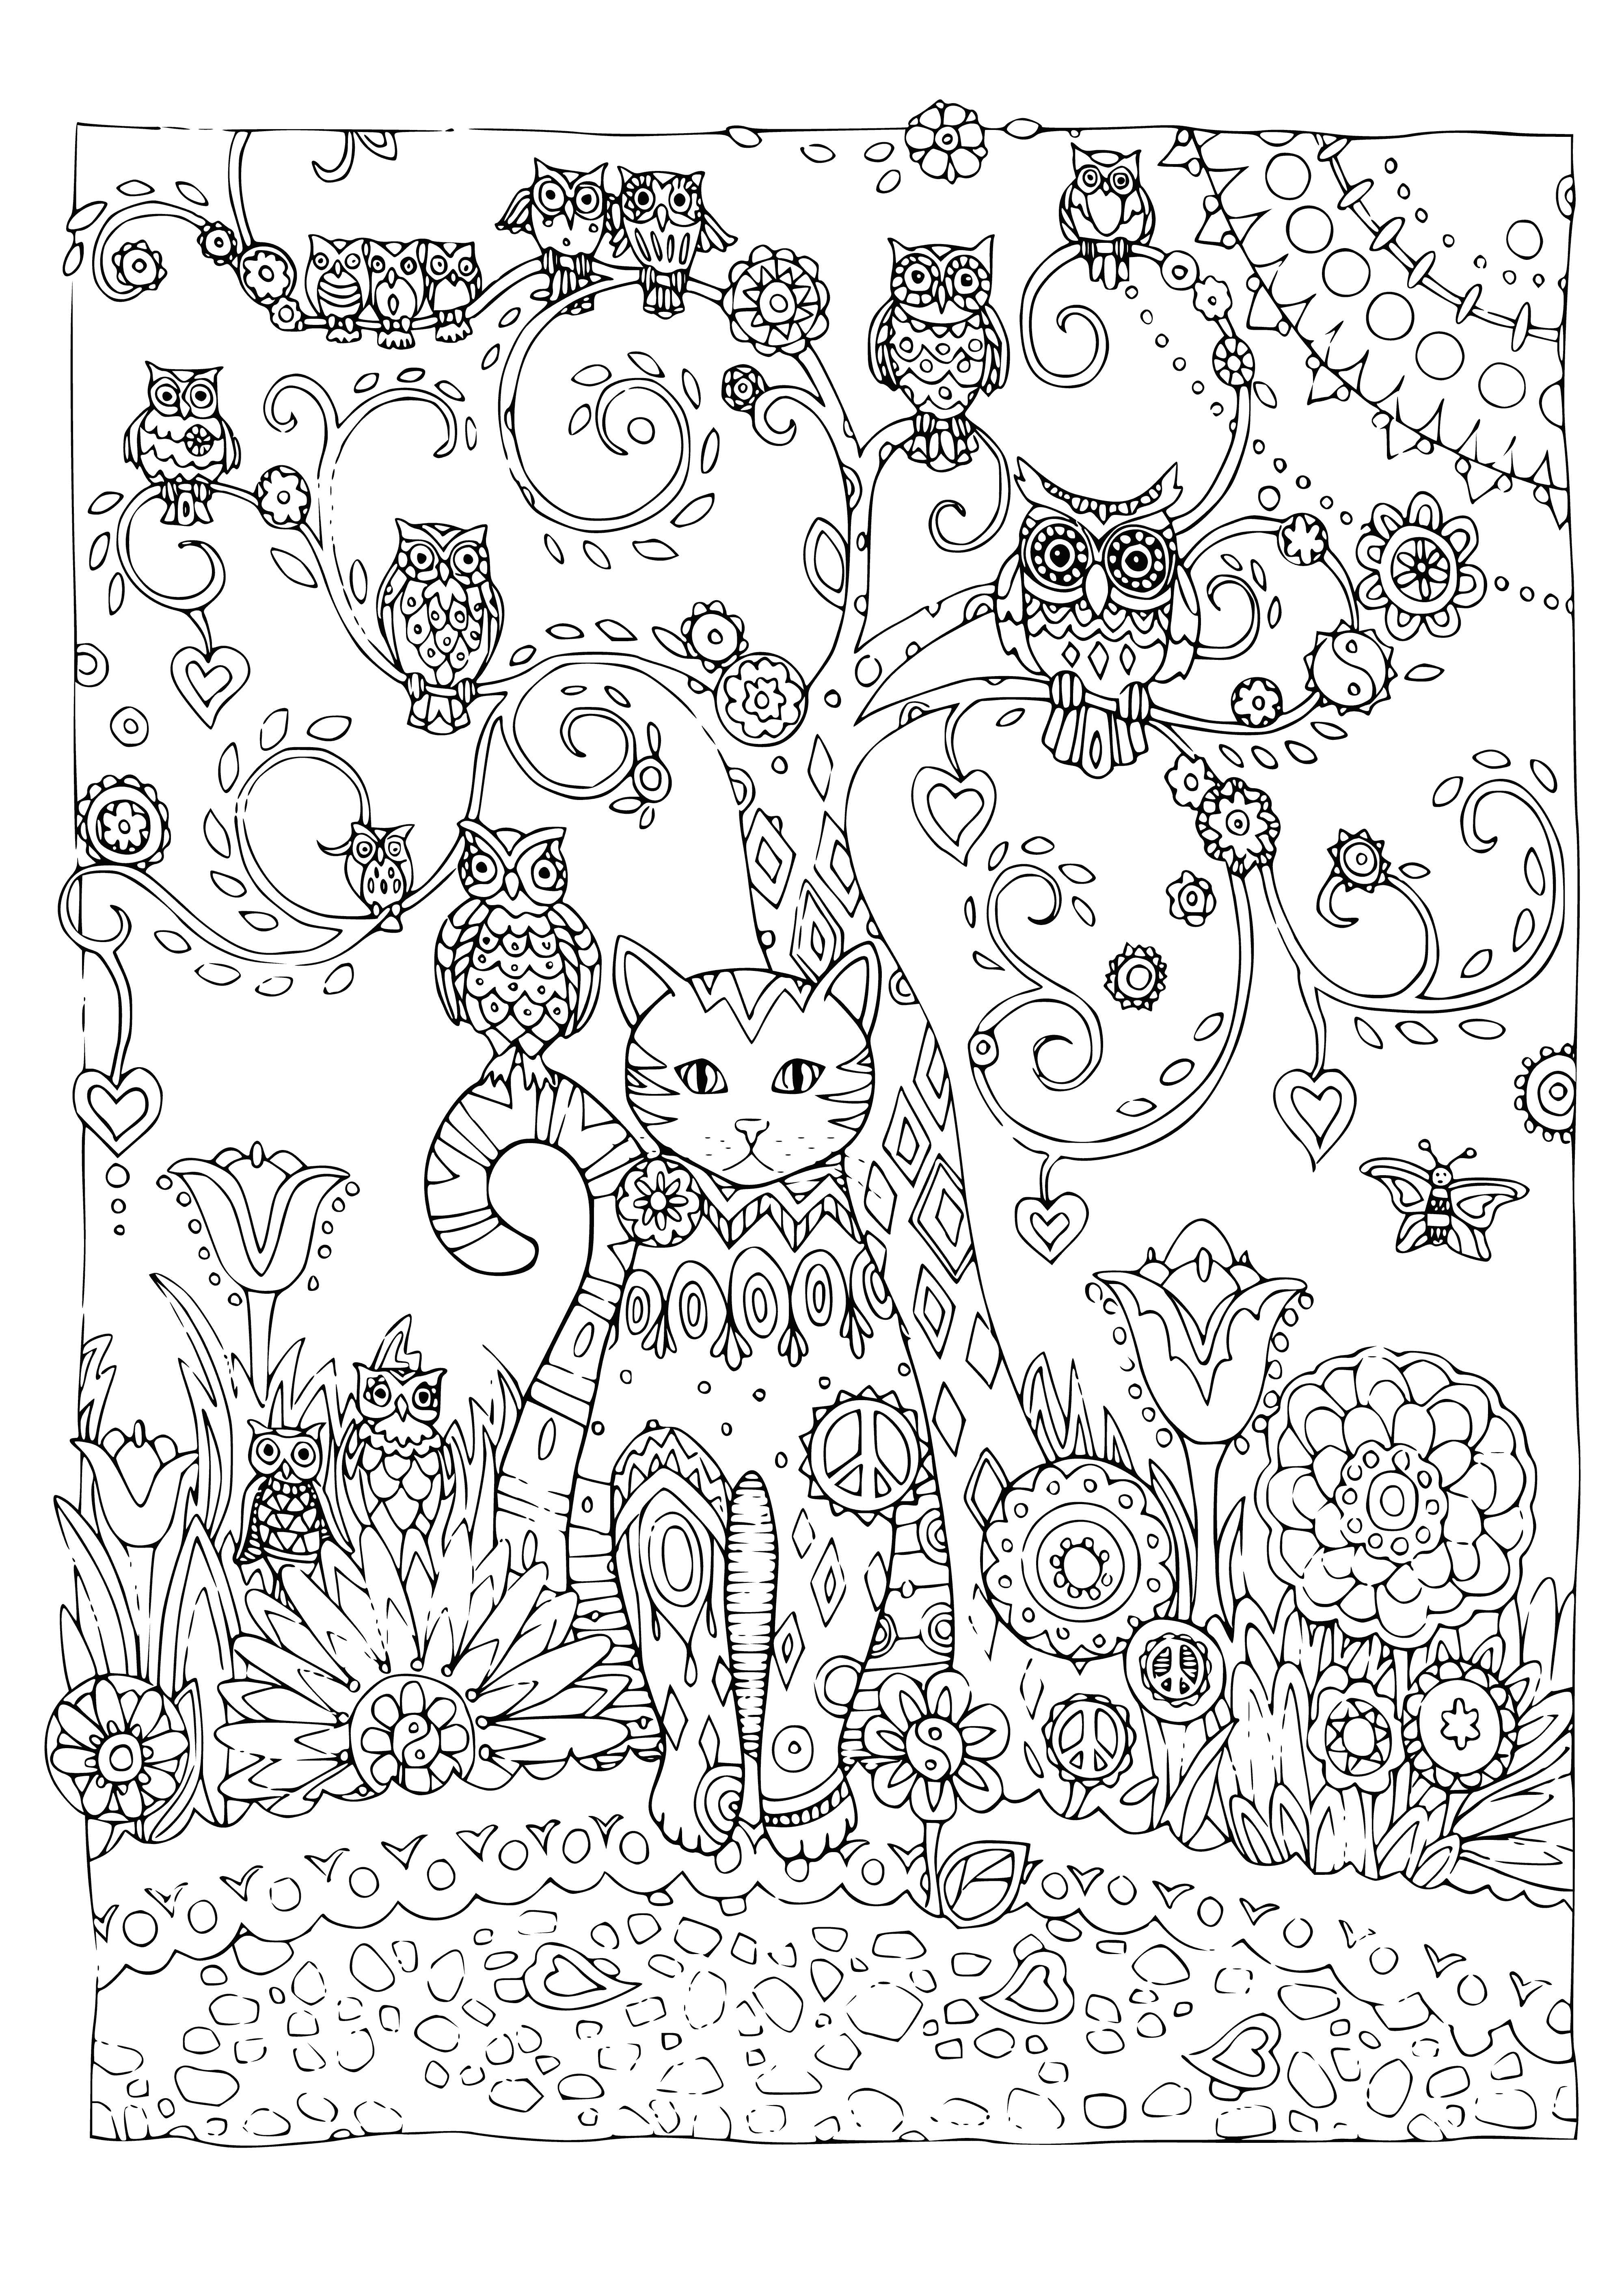 Cat and owls coloring page